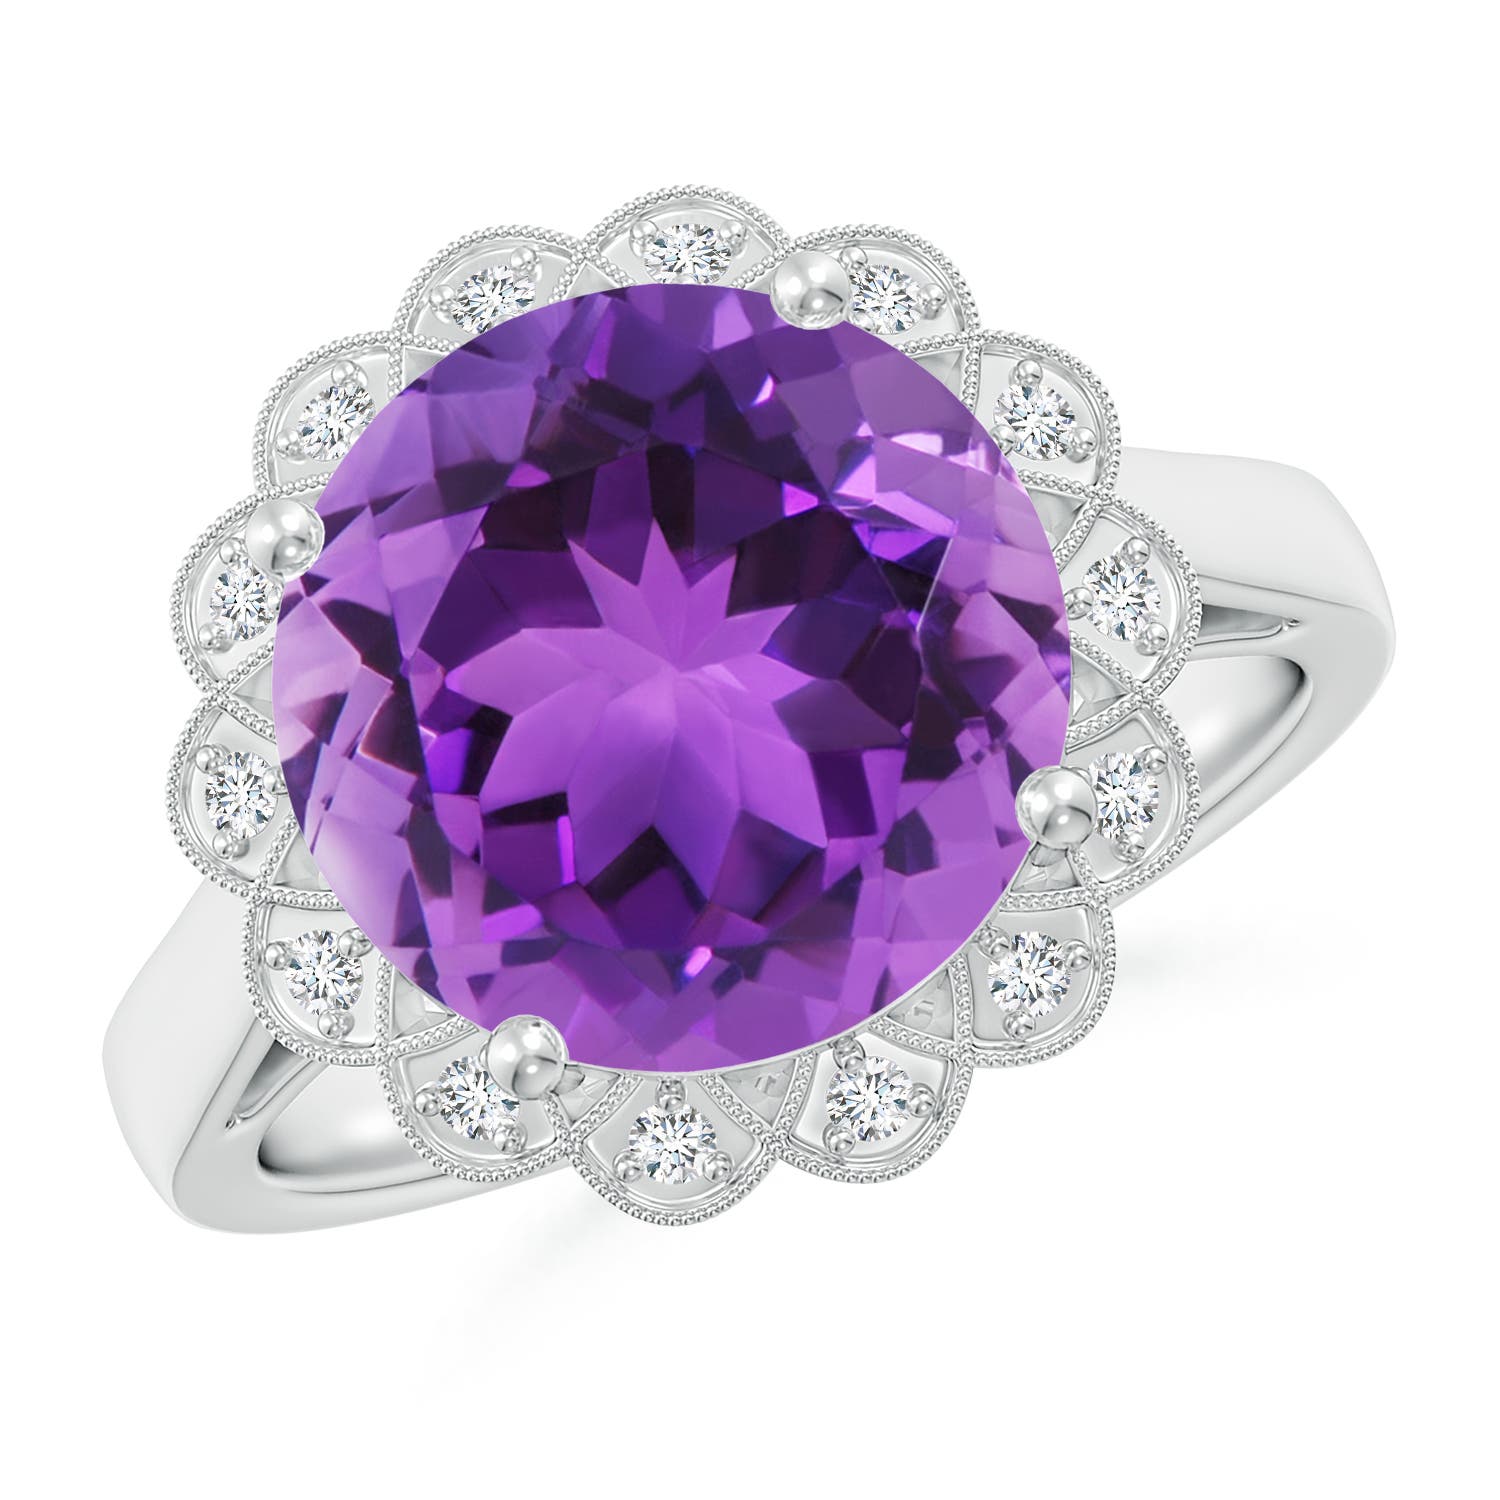 AAA - Amethyst / 4.86 CT / 14 KT White Gold